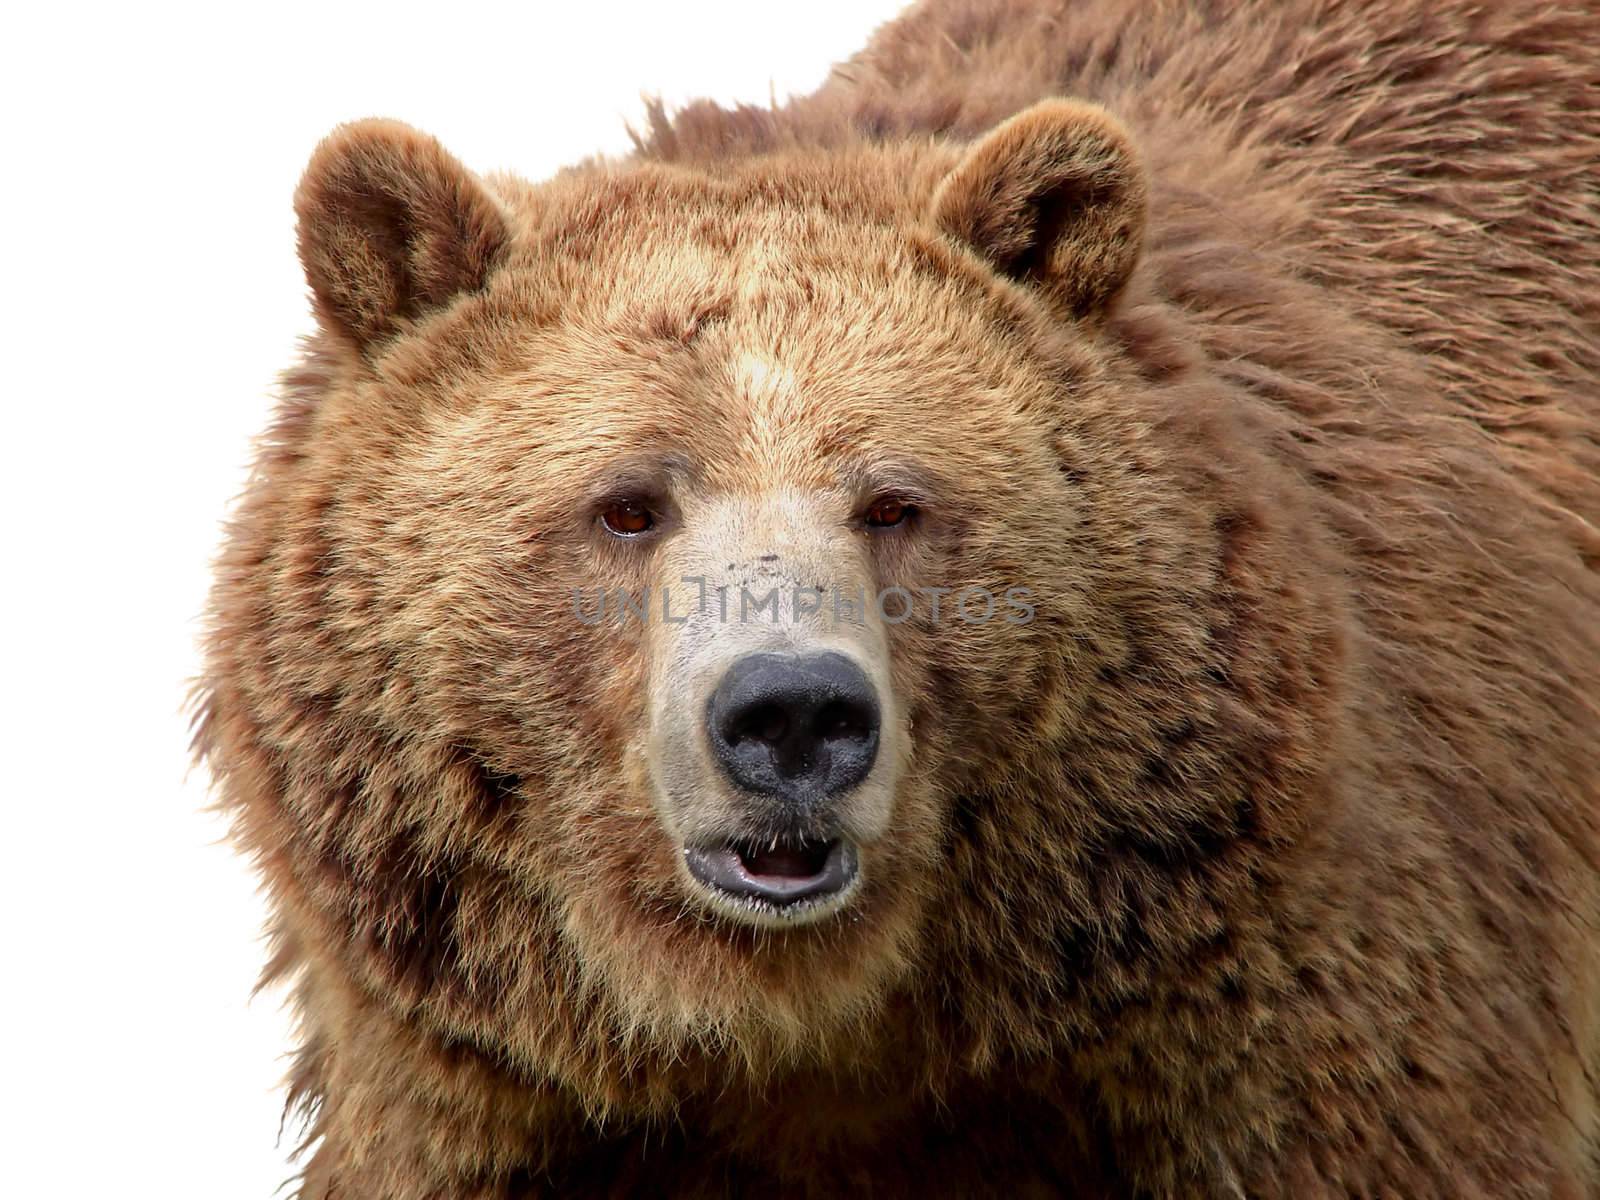 Detailed close-up portrait of a magnificient grizzly brown bear with texture of the fur showing.